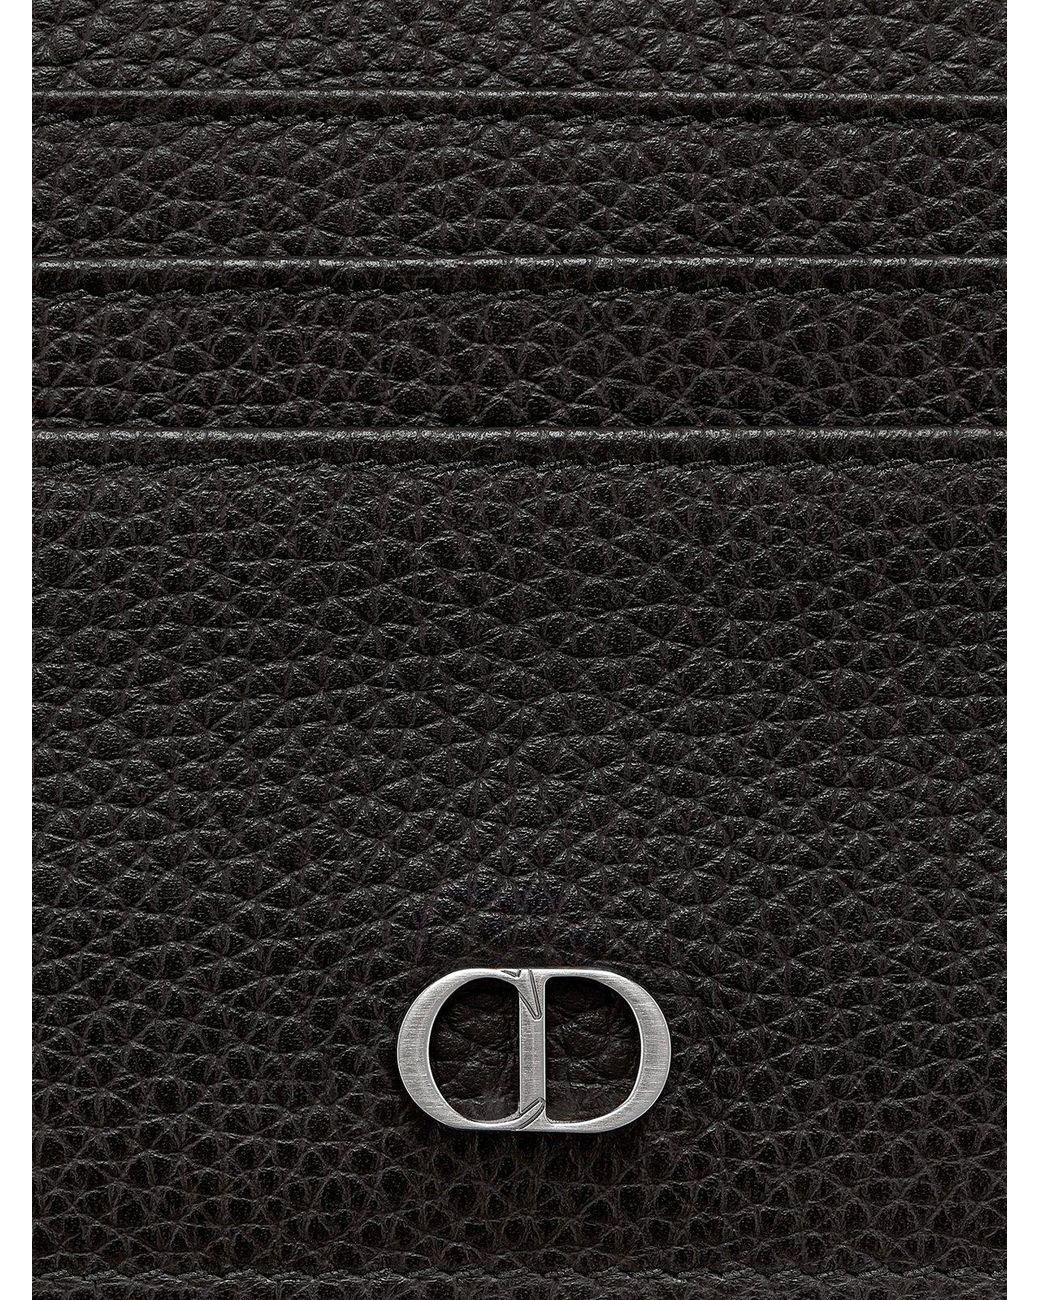 Zipped Long Wallet Black Grained Calfskin with CD Icon Signature